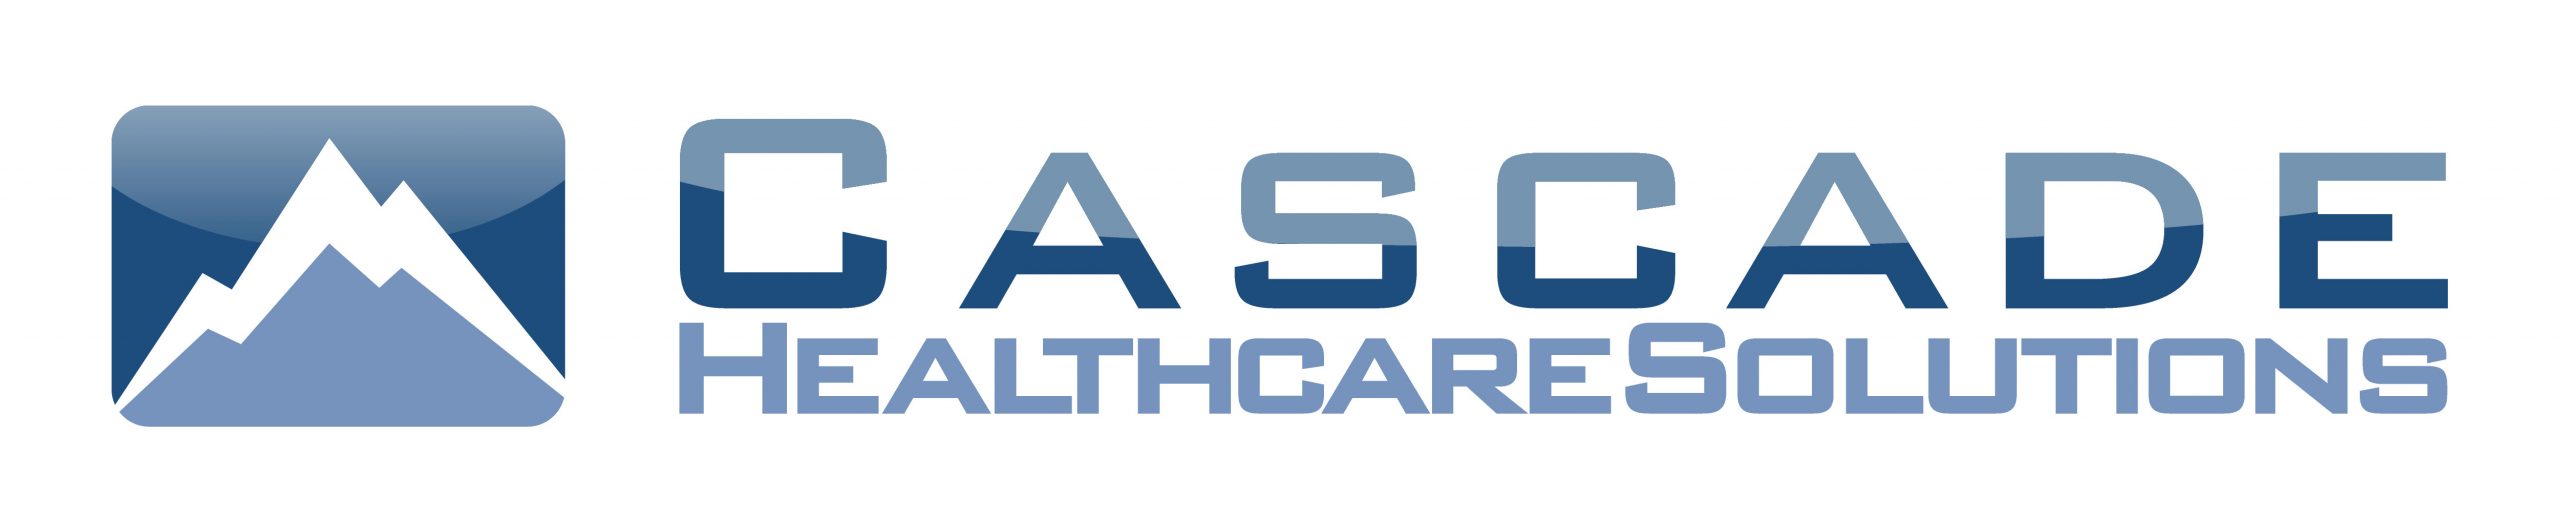 Roll-A-Ramp-Cascade Healthcare Solutions